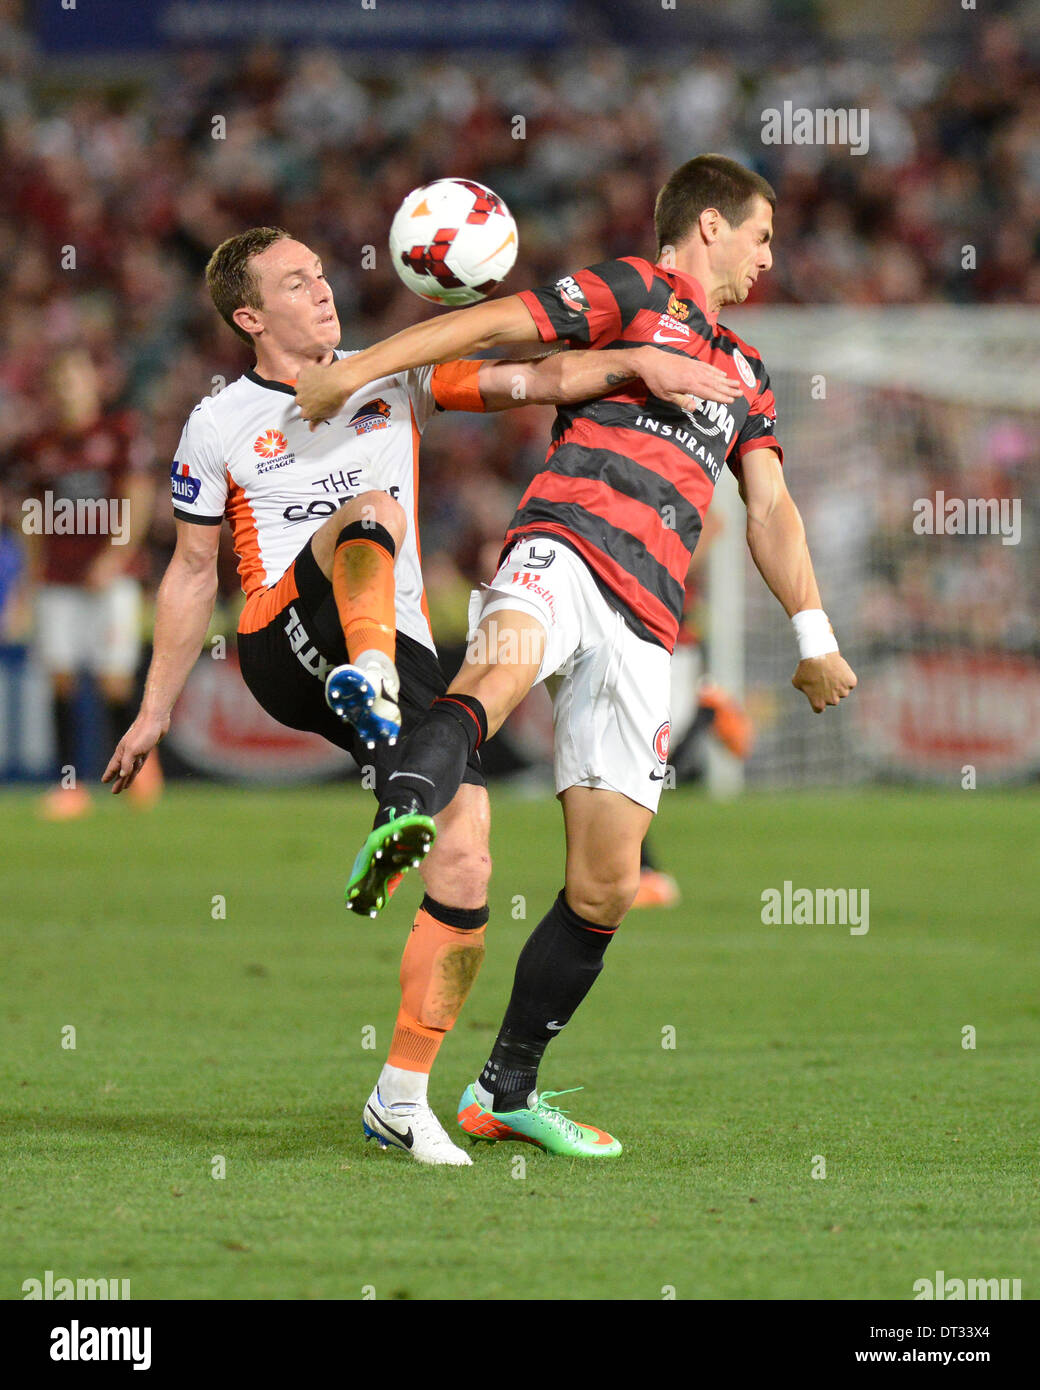 Sydney, Australia. 07th Feb, 2014. Brisbane Roar captain Matt Smith and Wanderers forward Tomi Juric in action during the Hyundai A League game between Western Sydney Wanderers FC and Brisbane Roar FC from the Pirtek Stadium, Parramatta. The game ended in a 1-1 draw. Credit:  Action Plus Sports/Alamy Live News Stock Photo